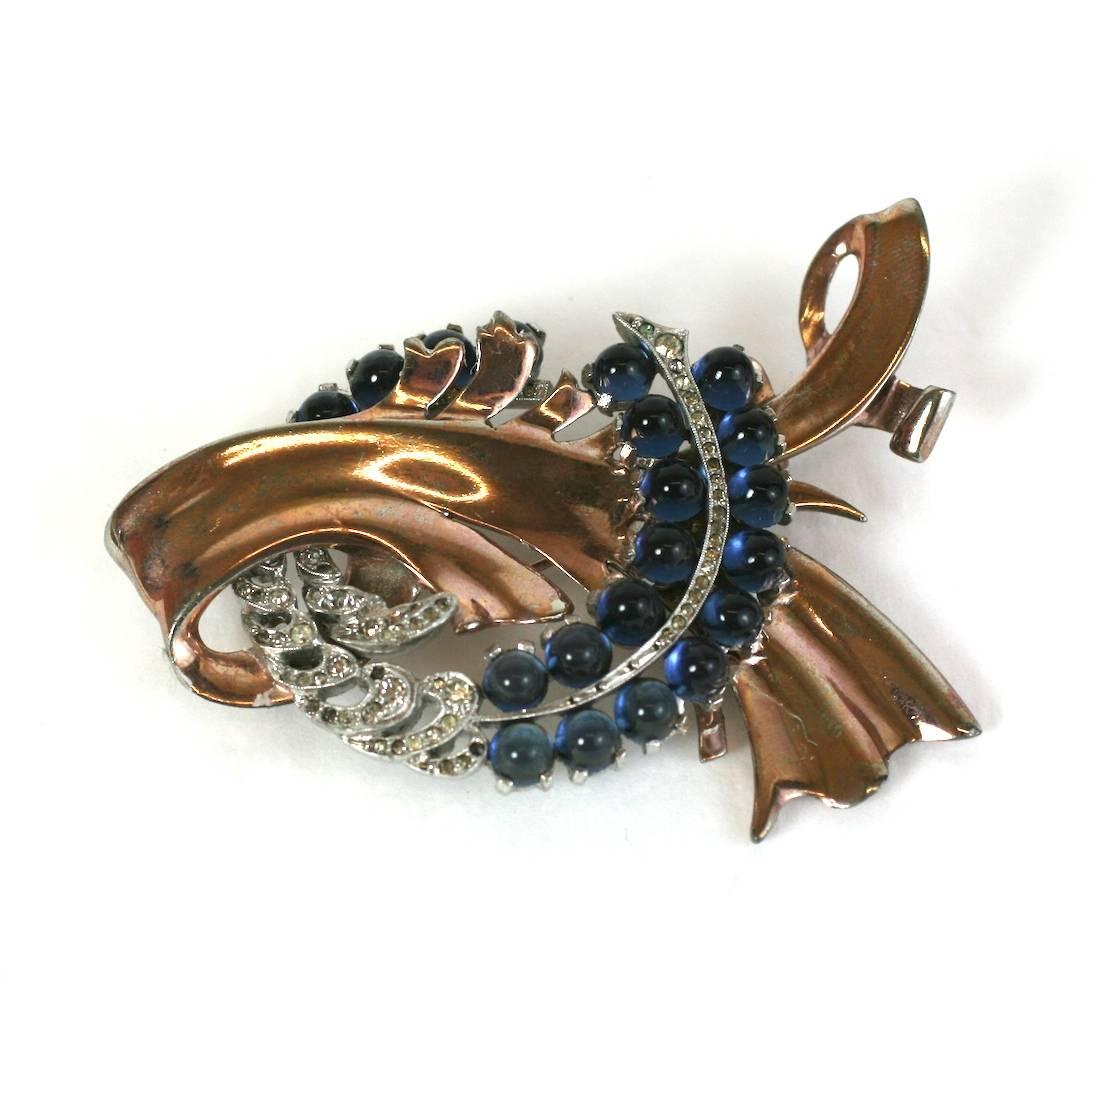 Wonderful, dimensional faux sapphire retro swirl brooch from the 1940's. A swirl of rose gold plated metal is accented with a pave set and faux sapphire cabochon interlocking 